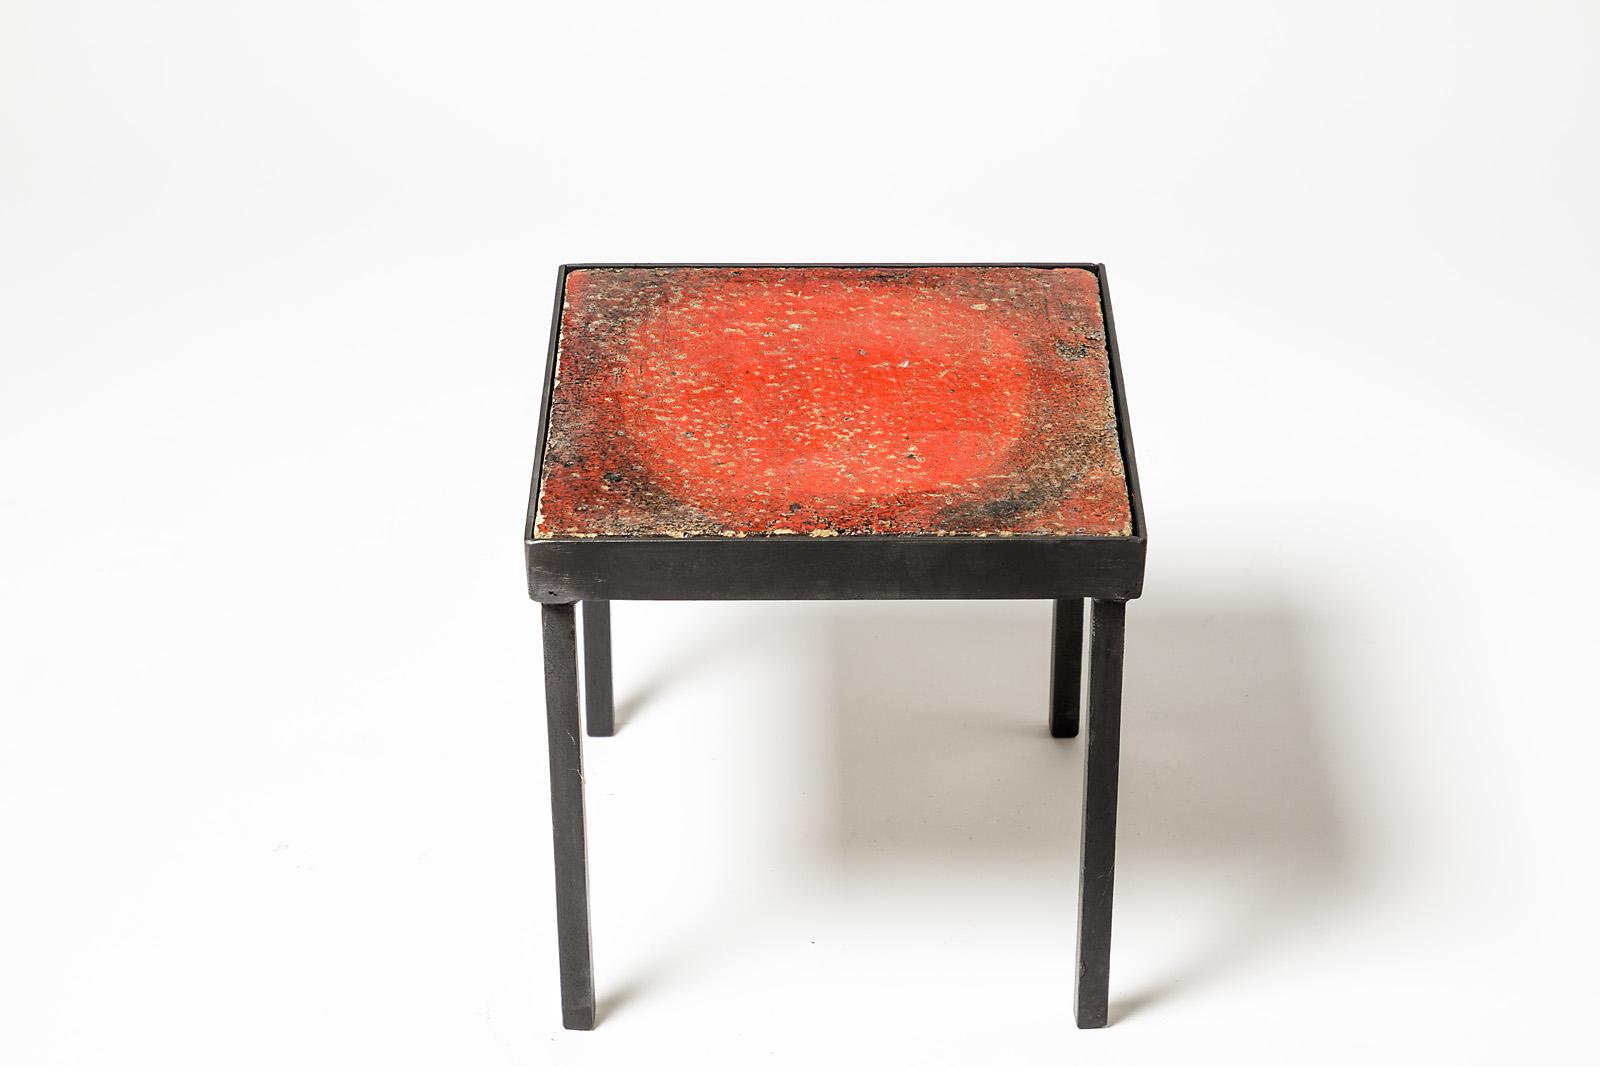 Red Ceramic Low Table or Sofa Table circa 1950 French Production In Good Condition For Sale In Neuilly-en- sancerre, FR